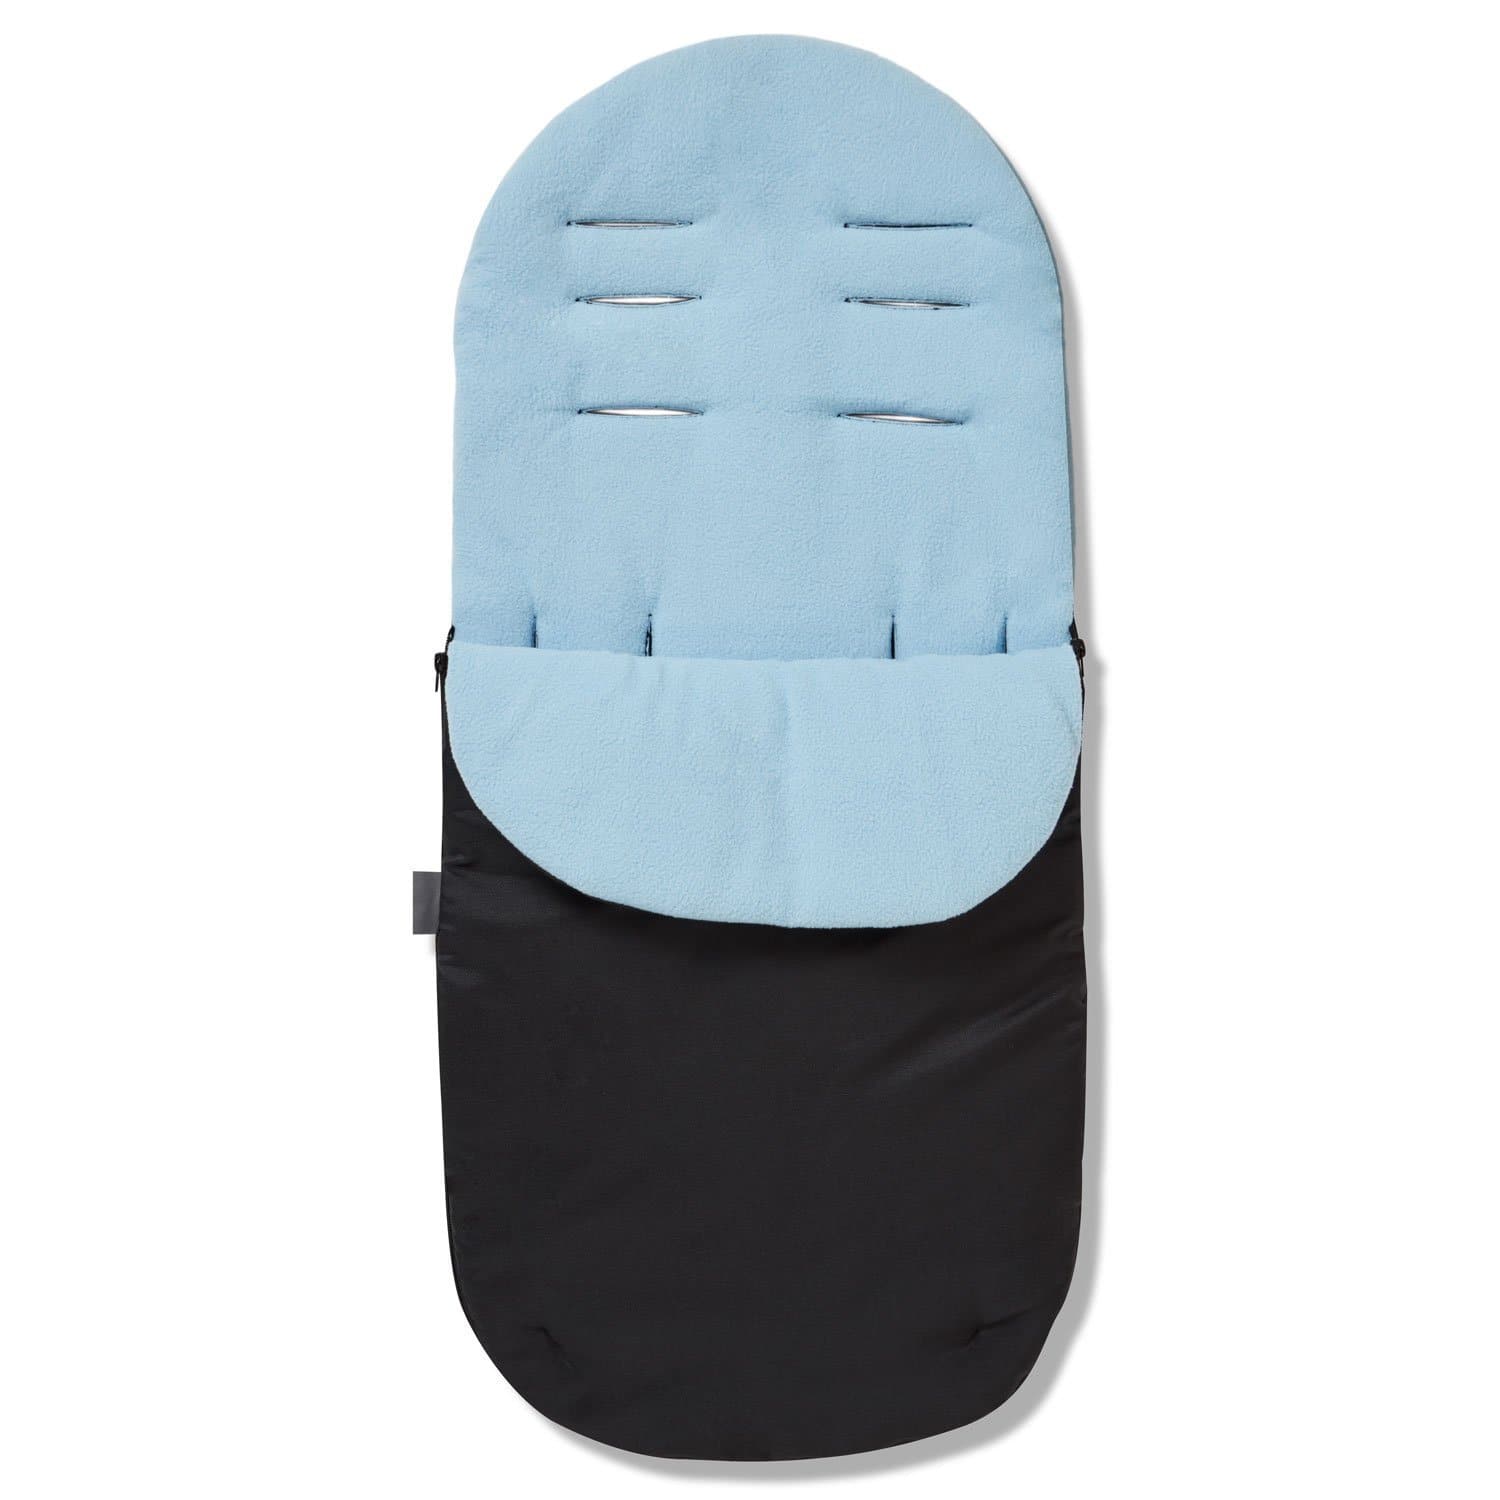 Footmuff / Cosy Toes Compatible with XTS - Light Blue / Fits All Models | For Your Little One